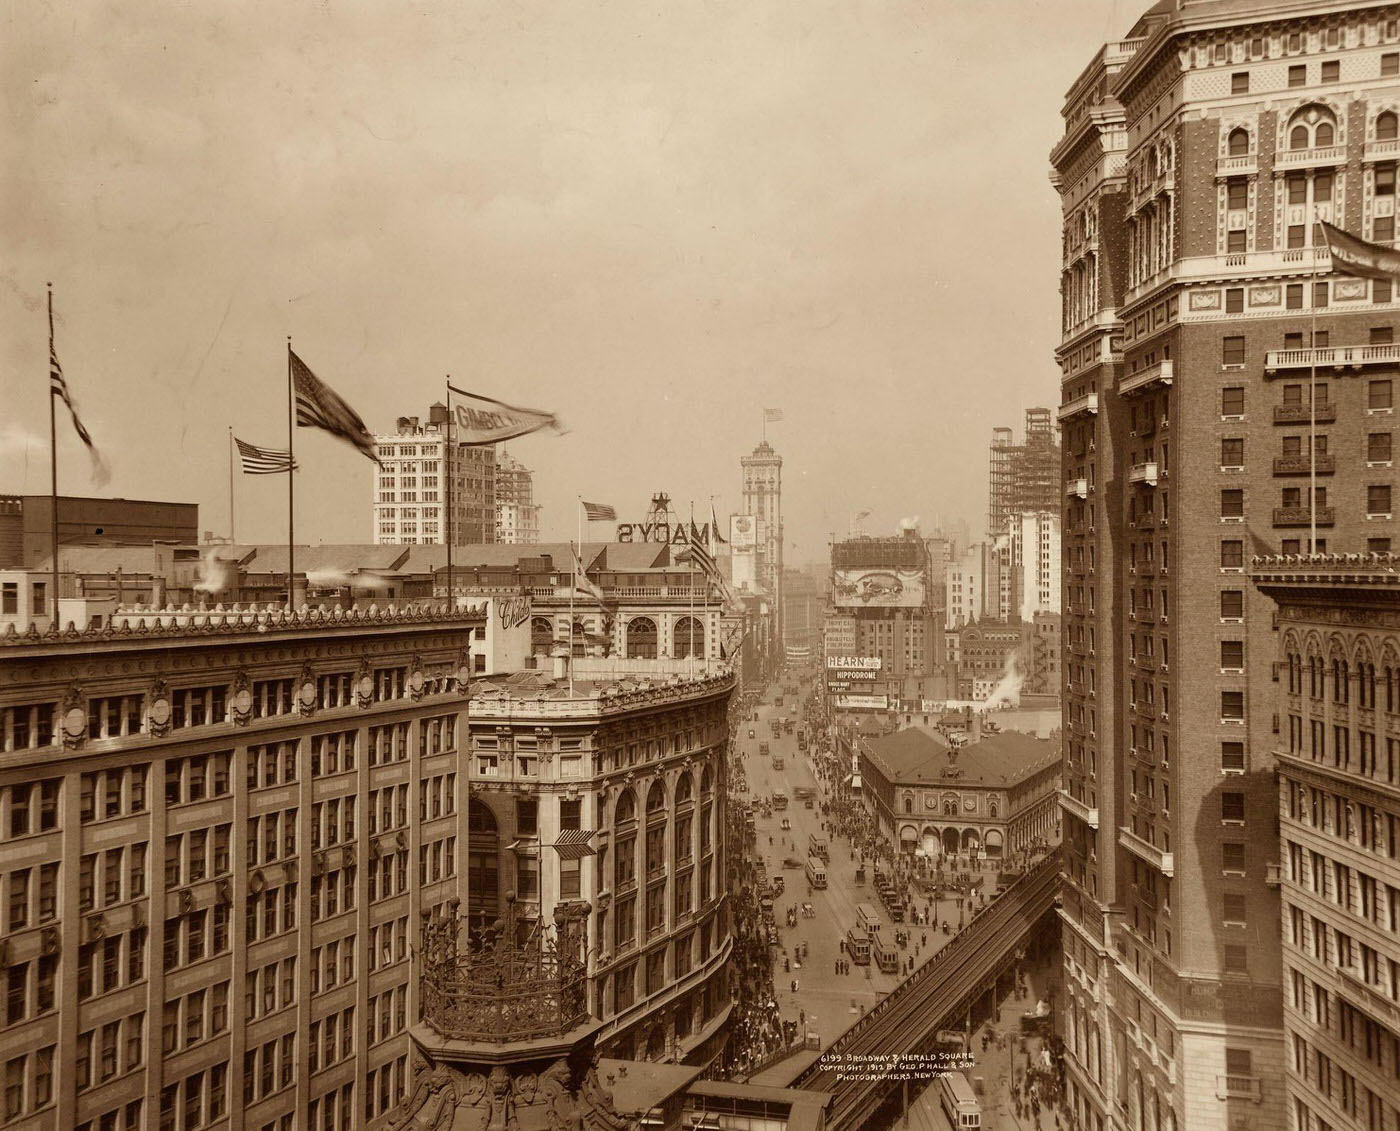 Broadway &Amp;Amp; Herald Square: View Along Broadway Passing Herald Square, Elevated Train Track Above Avenue Of The Americas With Visible Structures Including Gimbels And Macy'S Department Stores, Notel Normandie, Hippodrome, Times Tower, 1912